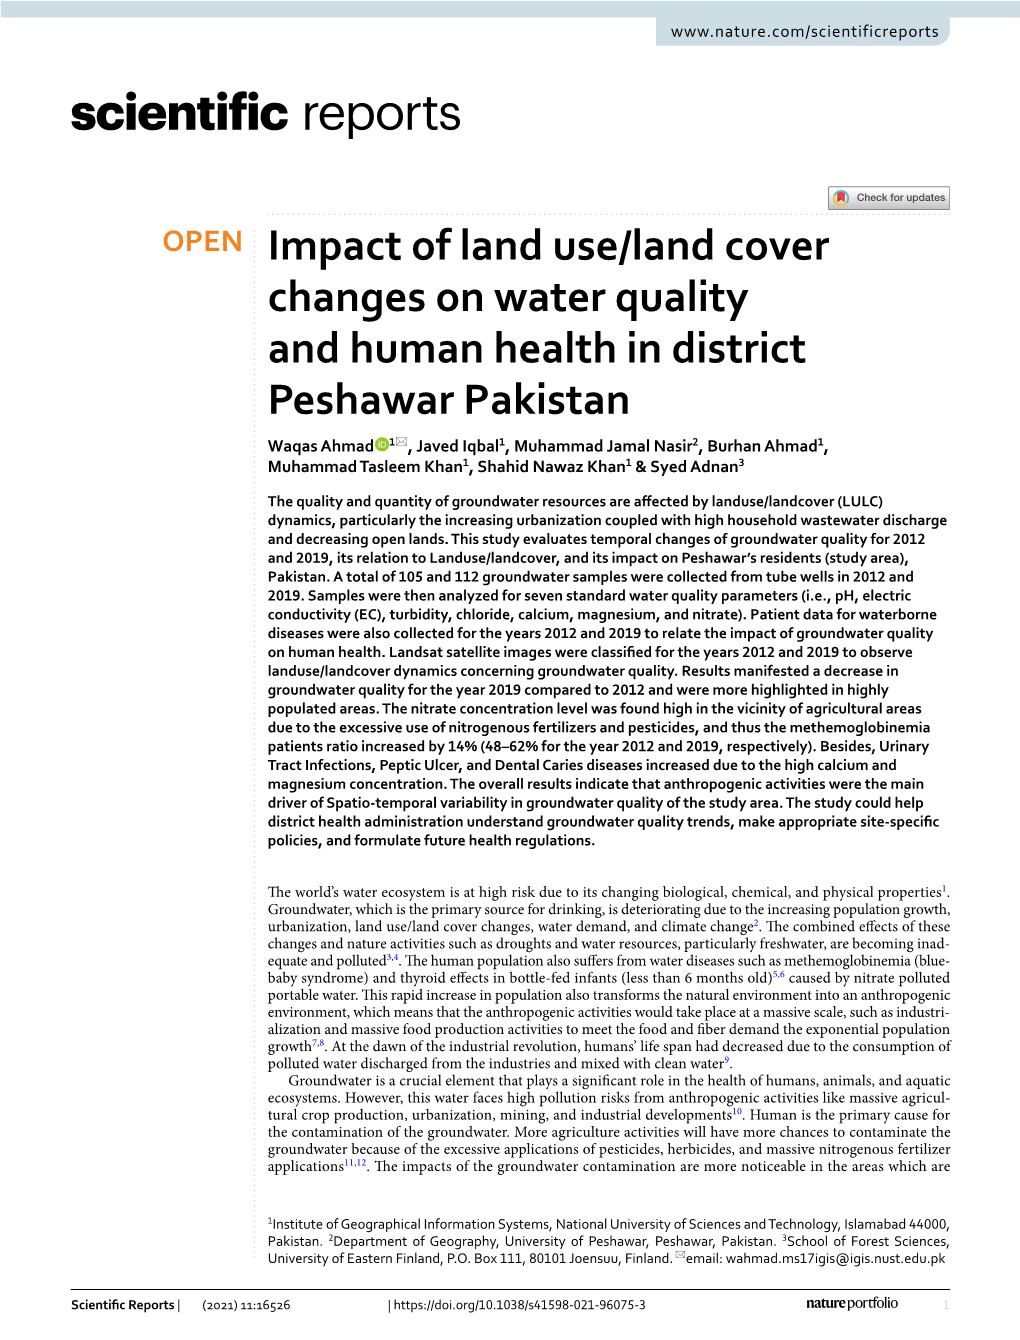 Impact of Land Use/Land Cover Changes on Water Quality and Human Health in District Peshawar Pakistan